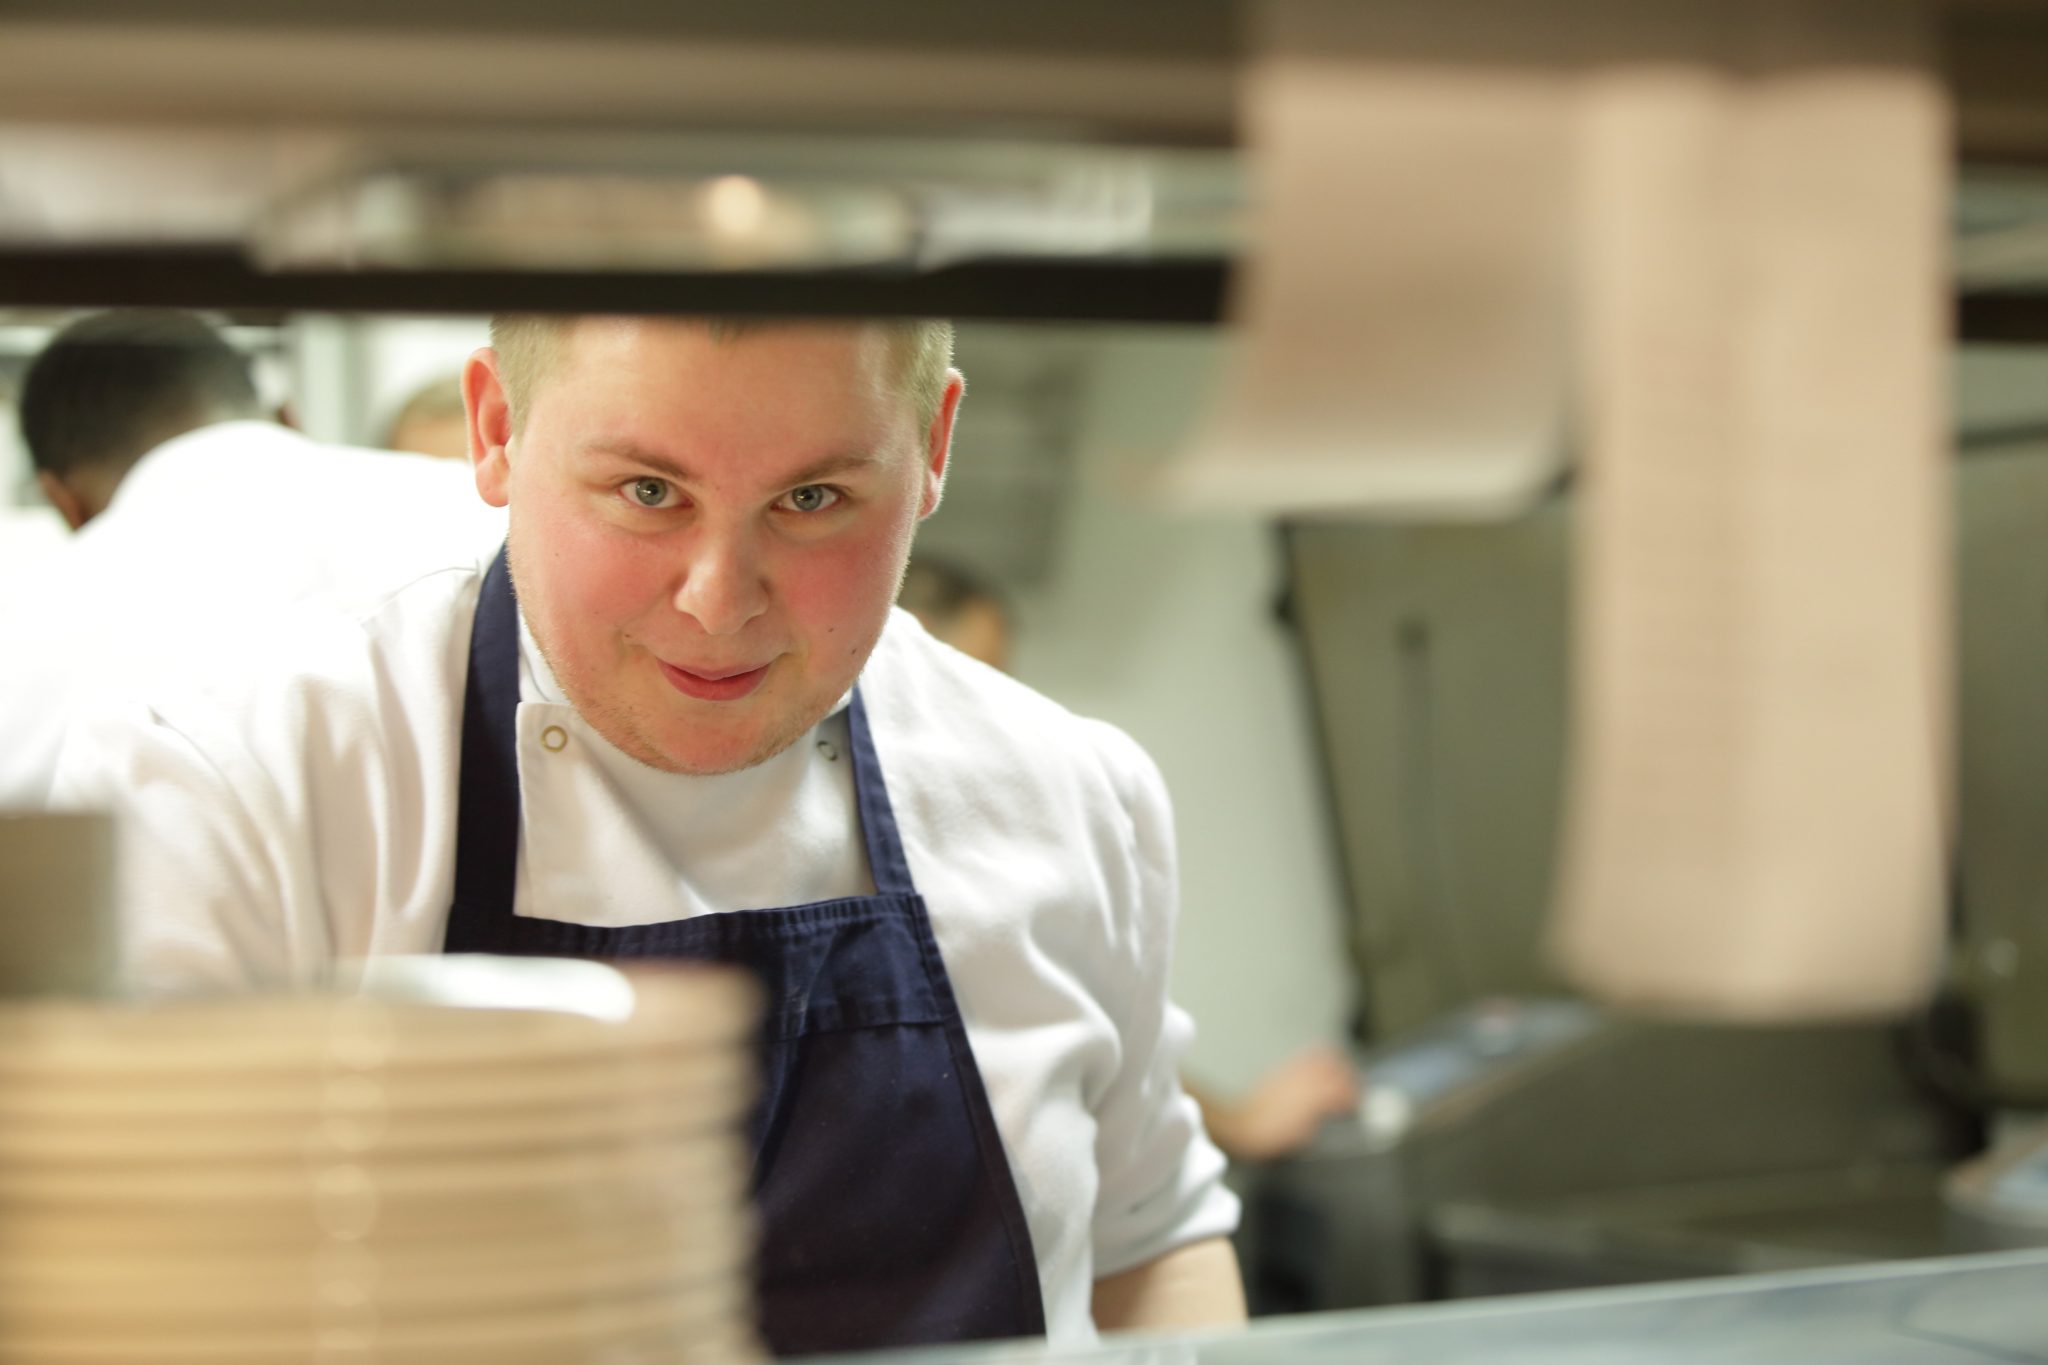 Chef at one of Newcastle’s top restaurants named North East Young Chef